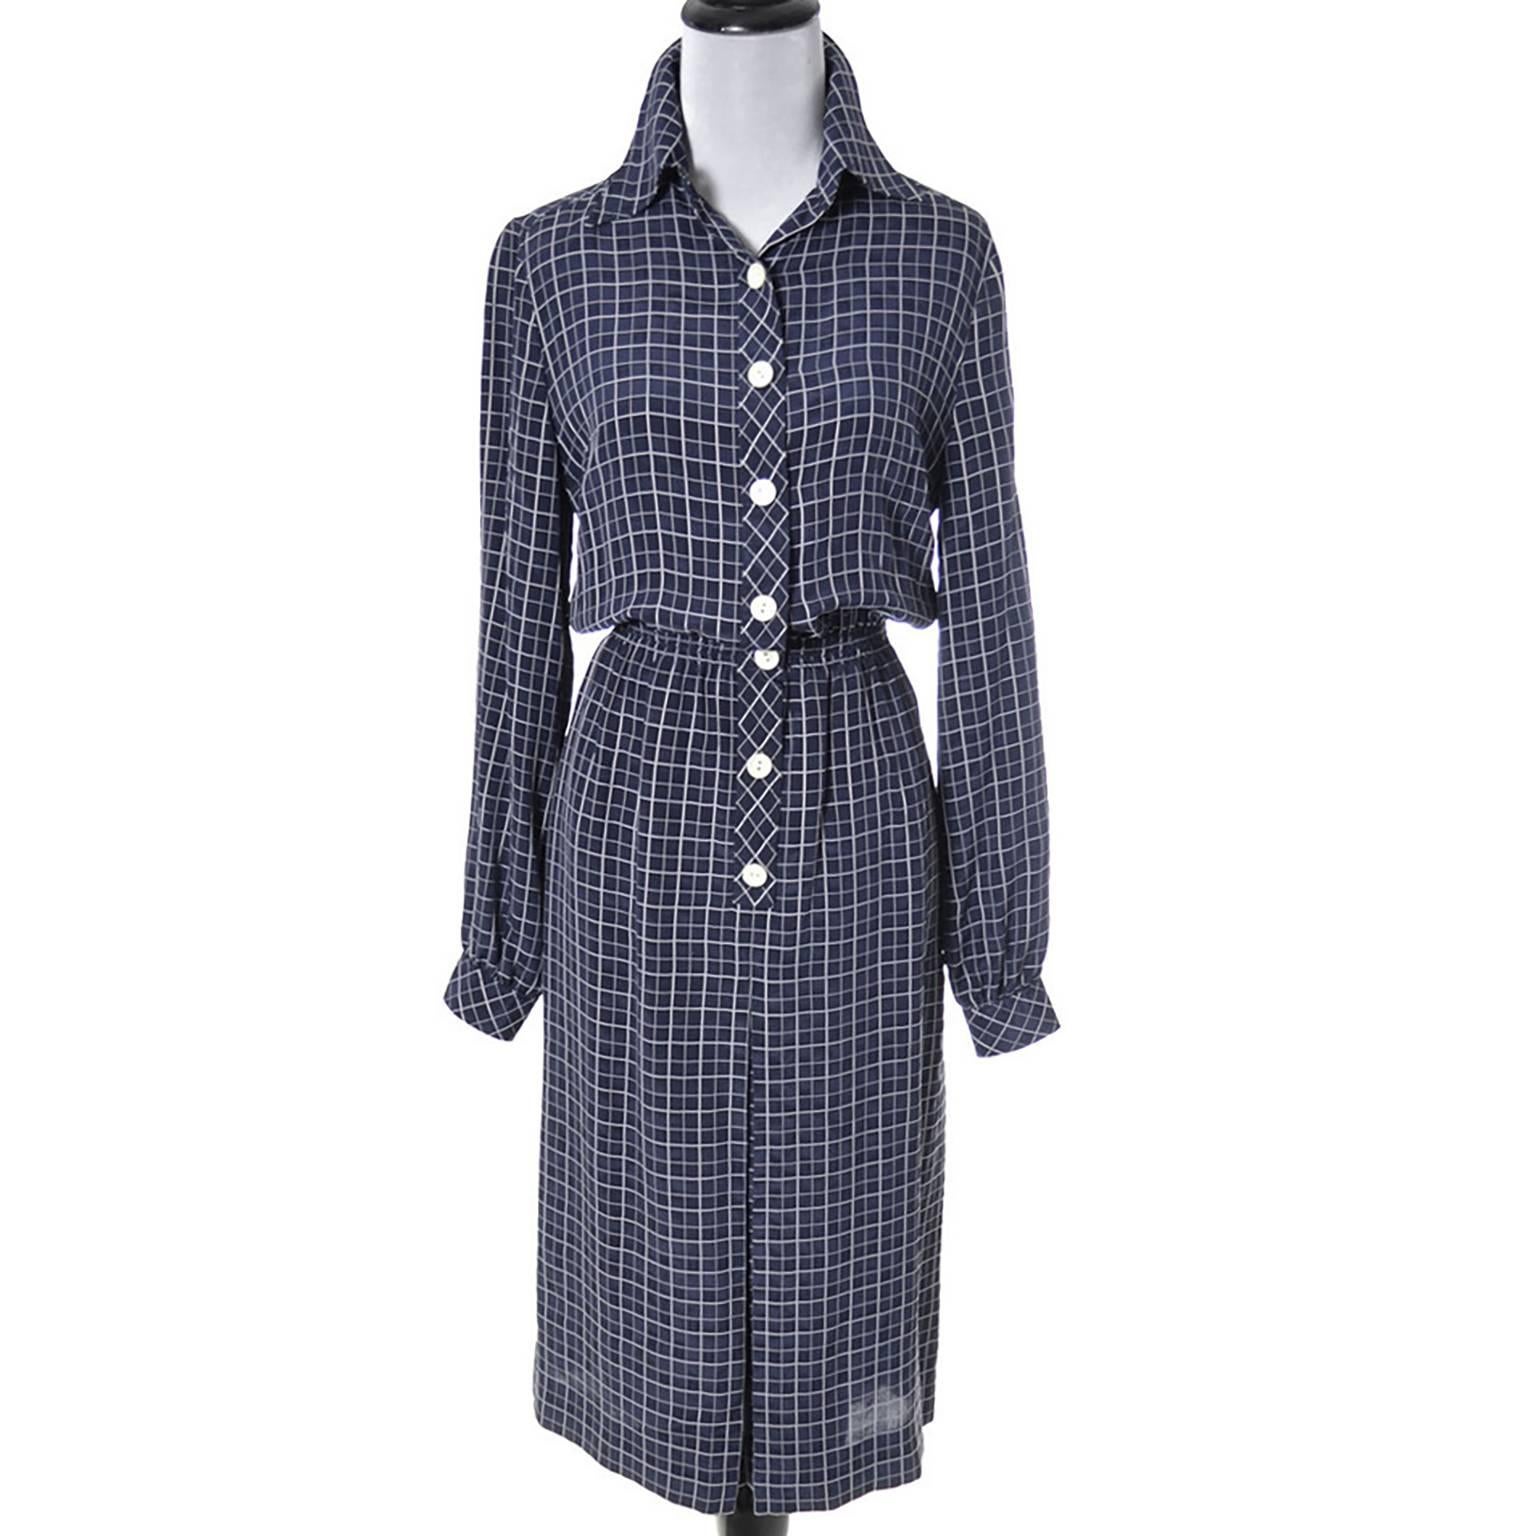 This is a wonderful 1970's vintage dress from Loewe - the Madrid, Spain high end fashion brand.  This navy blue and white vintage dress comes with a matching logo scarf and a navy blue half slip to wear underneath.  The fabric feels like a